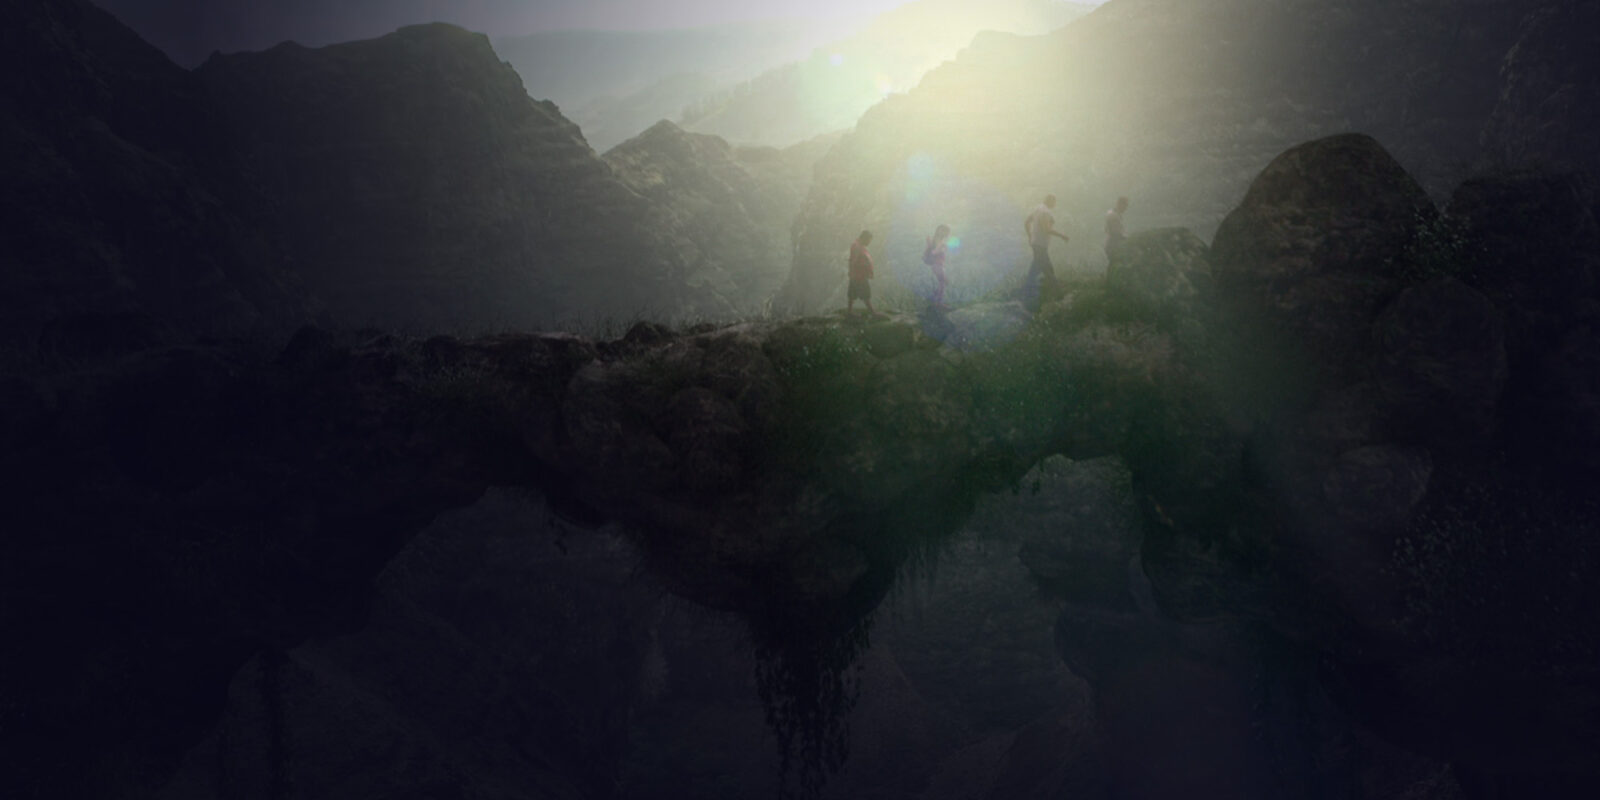 Four people crossing a stone bridge in the middle of the mountains